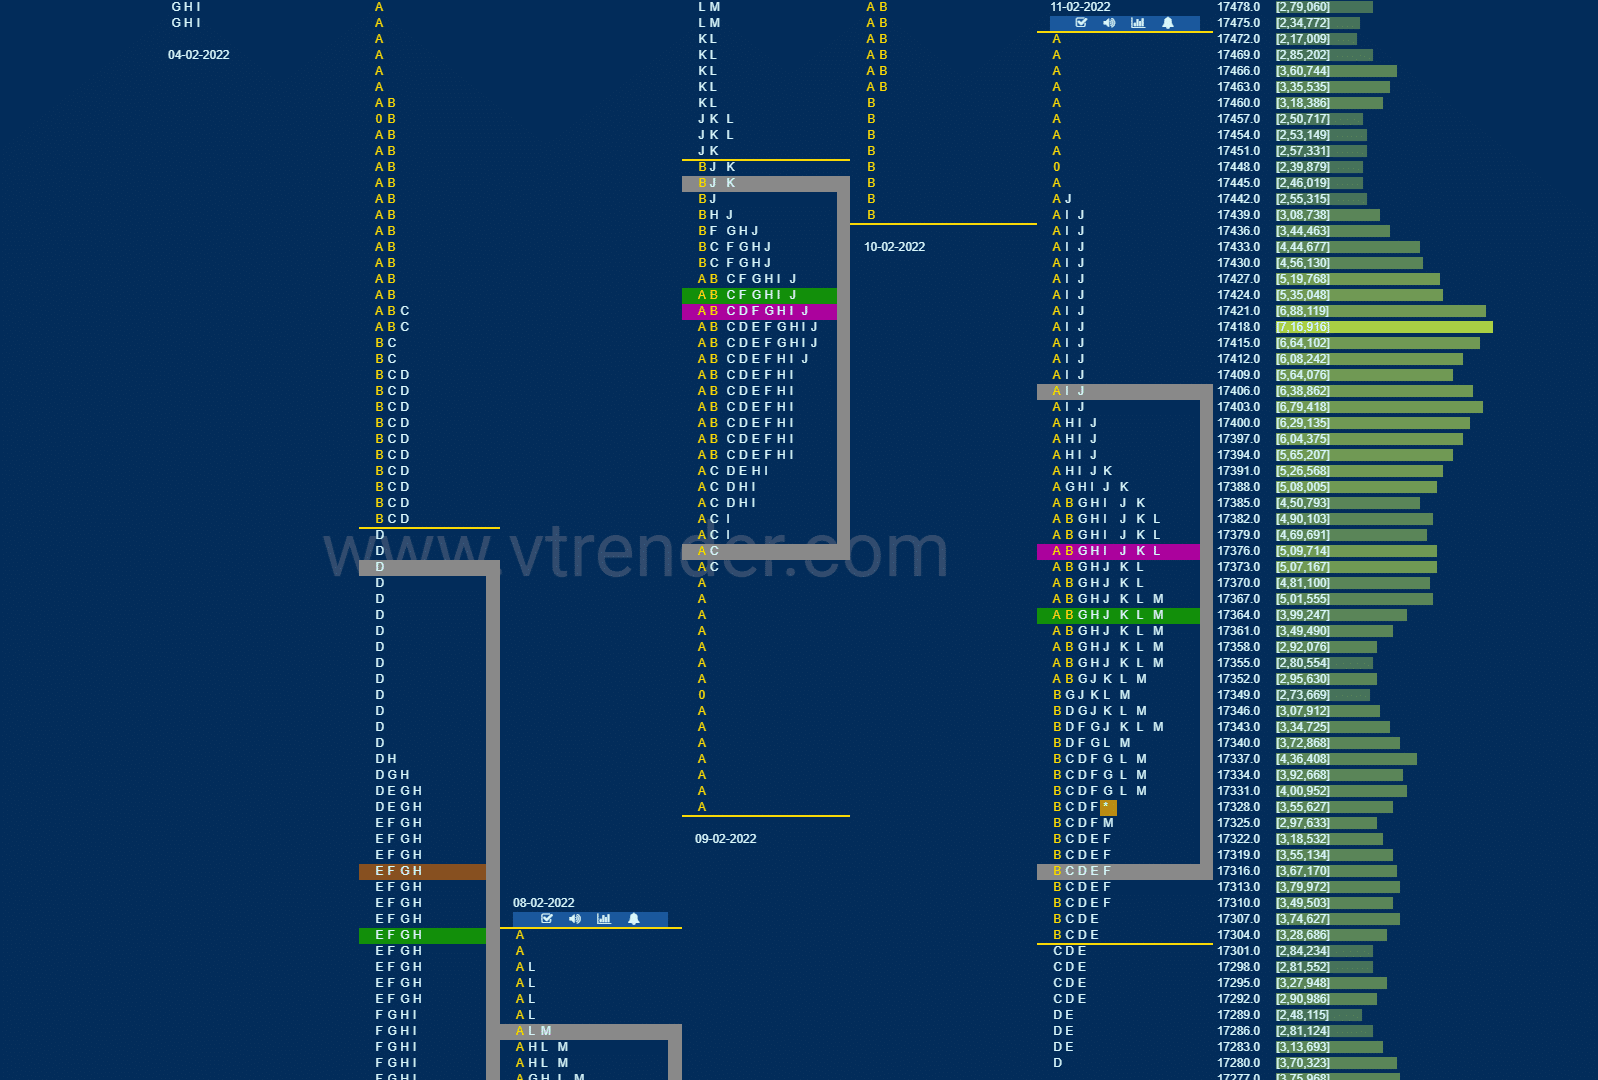 Nf 8 Market Profile Analysis Dated 11Th February 2022 Banknifty Futures, Charts, Day Trading, Intraday Trading, Intraday Trading Strategies, Market Profile, Market Profile Trading Strategies, Nifty Futures, Order Flow Analysis, Support And Resistance, Technical Analysis, Trading Strategies, Volume Profile Trading